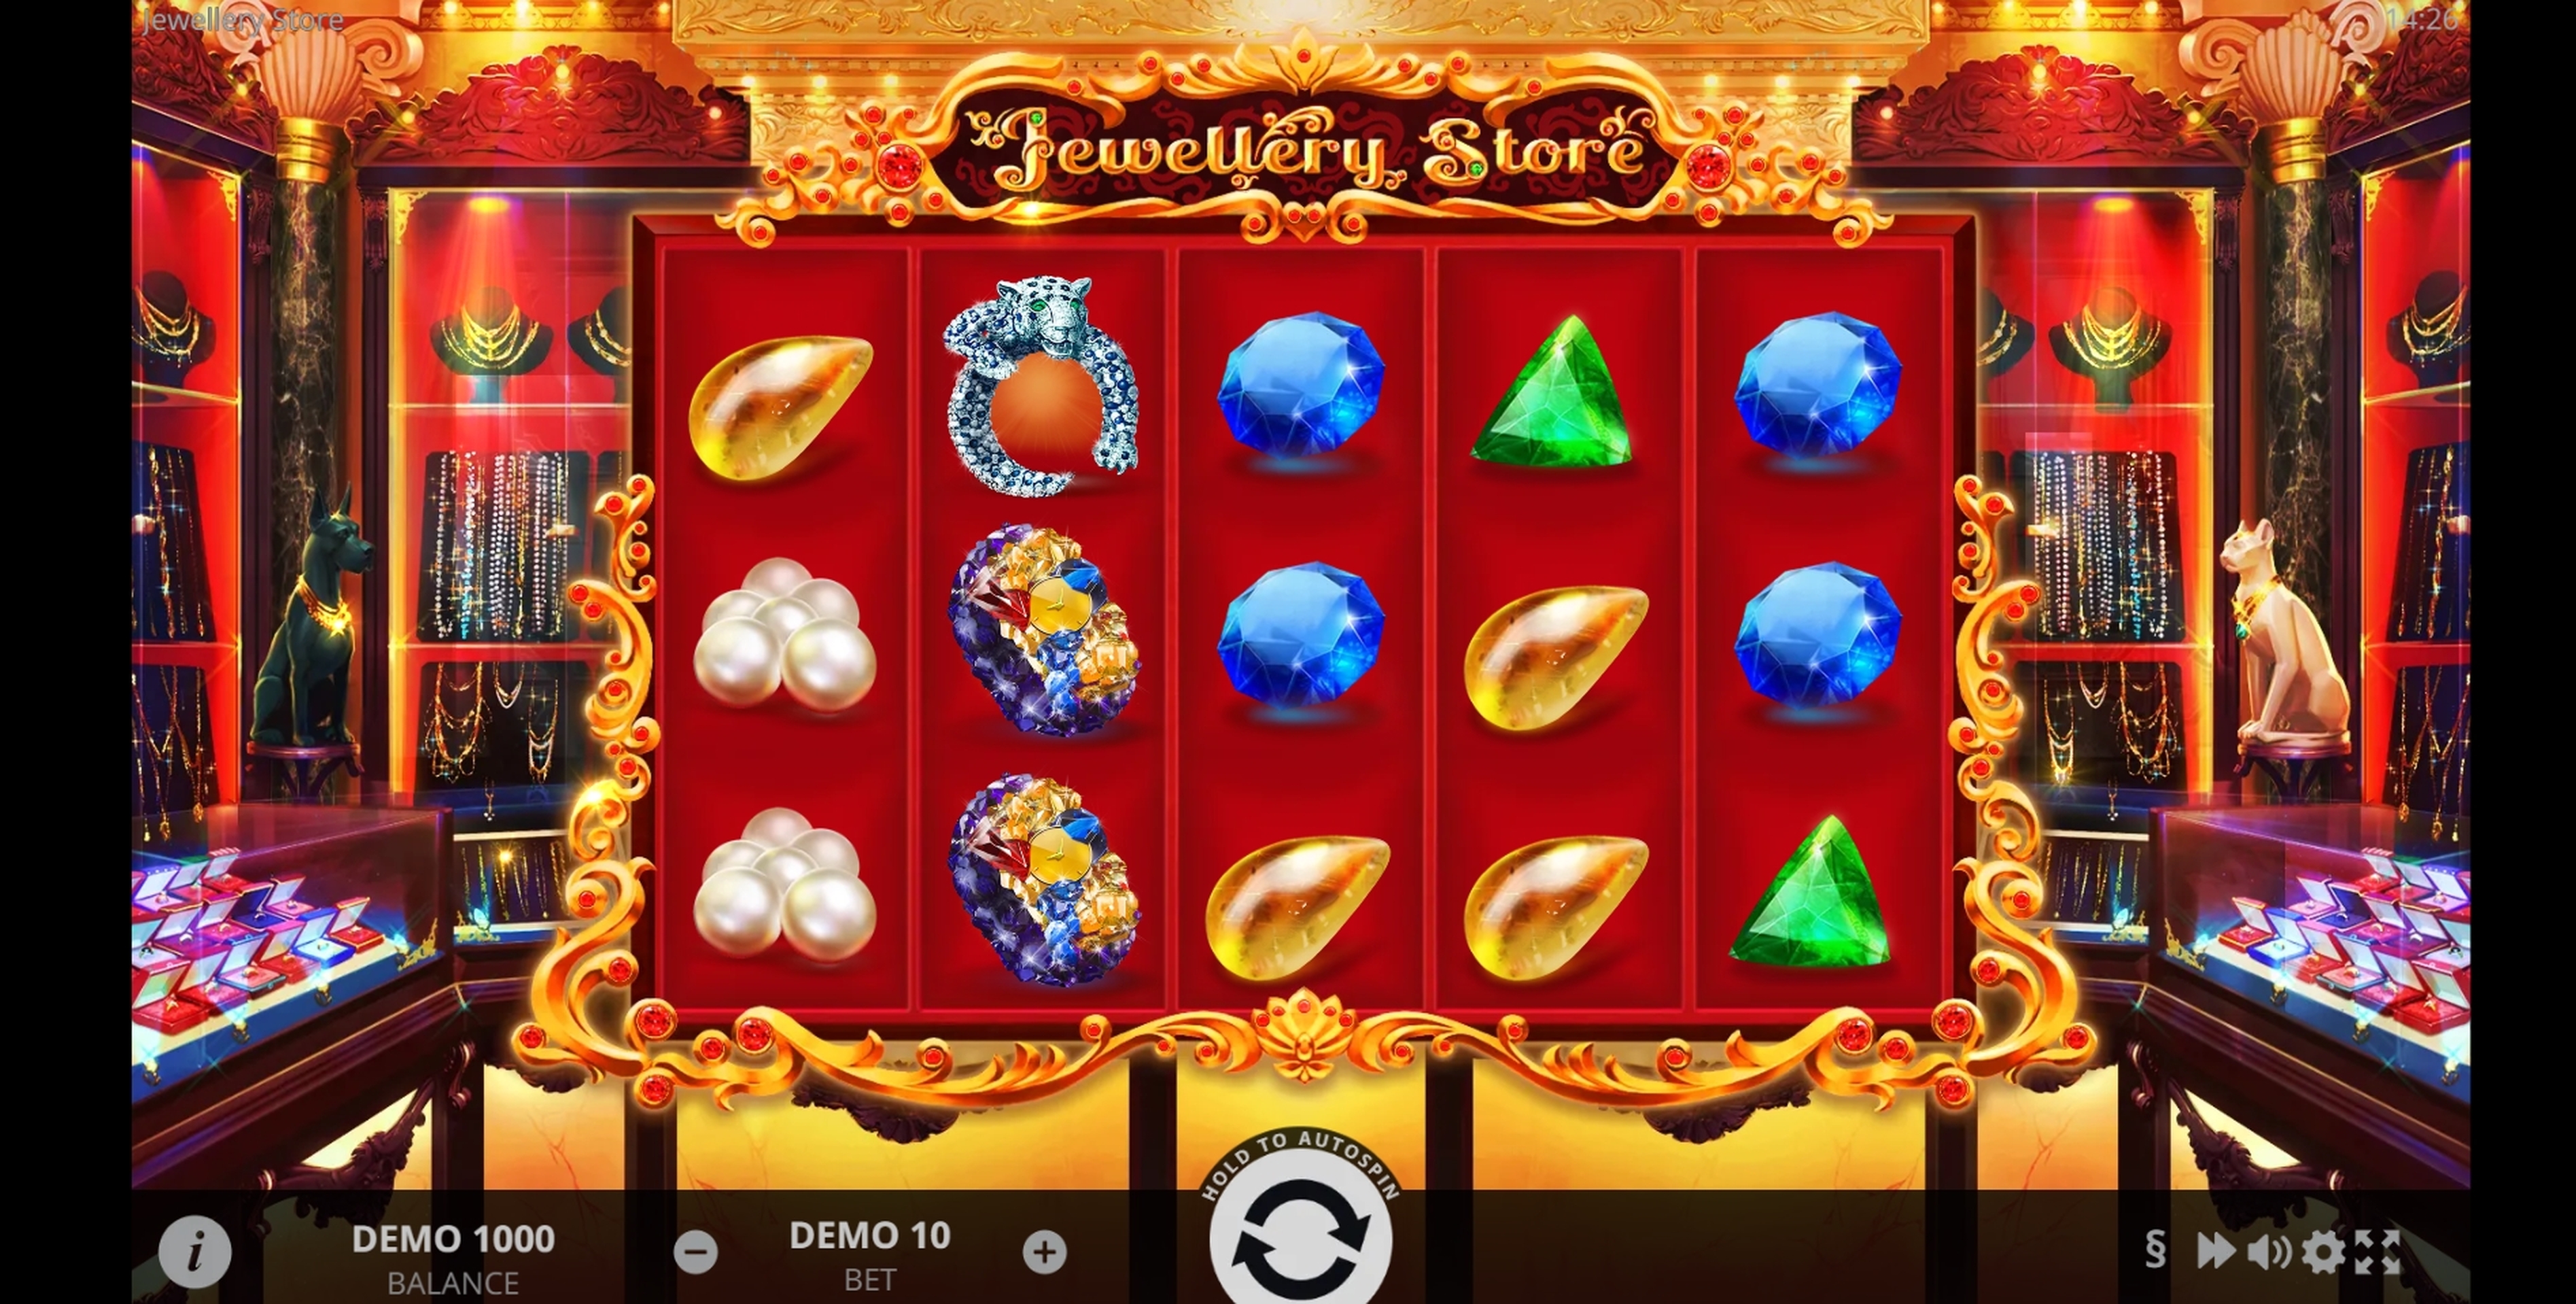 Reels in Jewellery Store Slot Game by Evoplay Entertainment